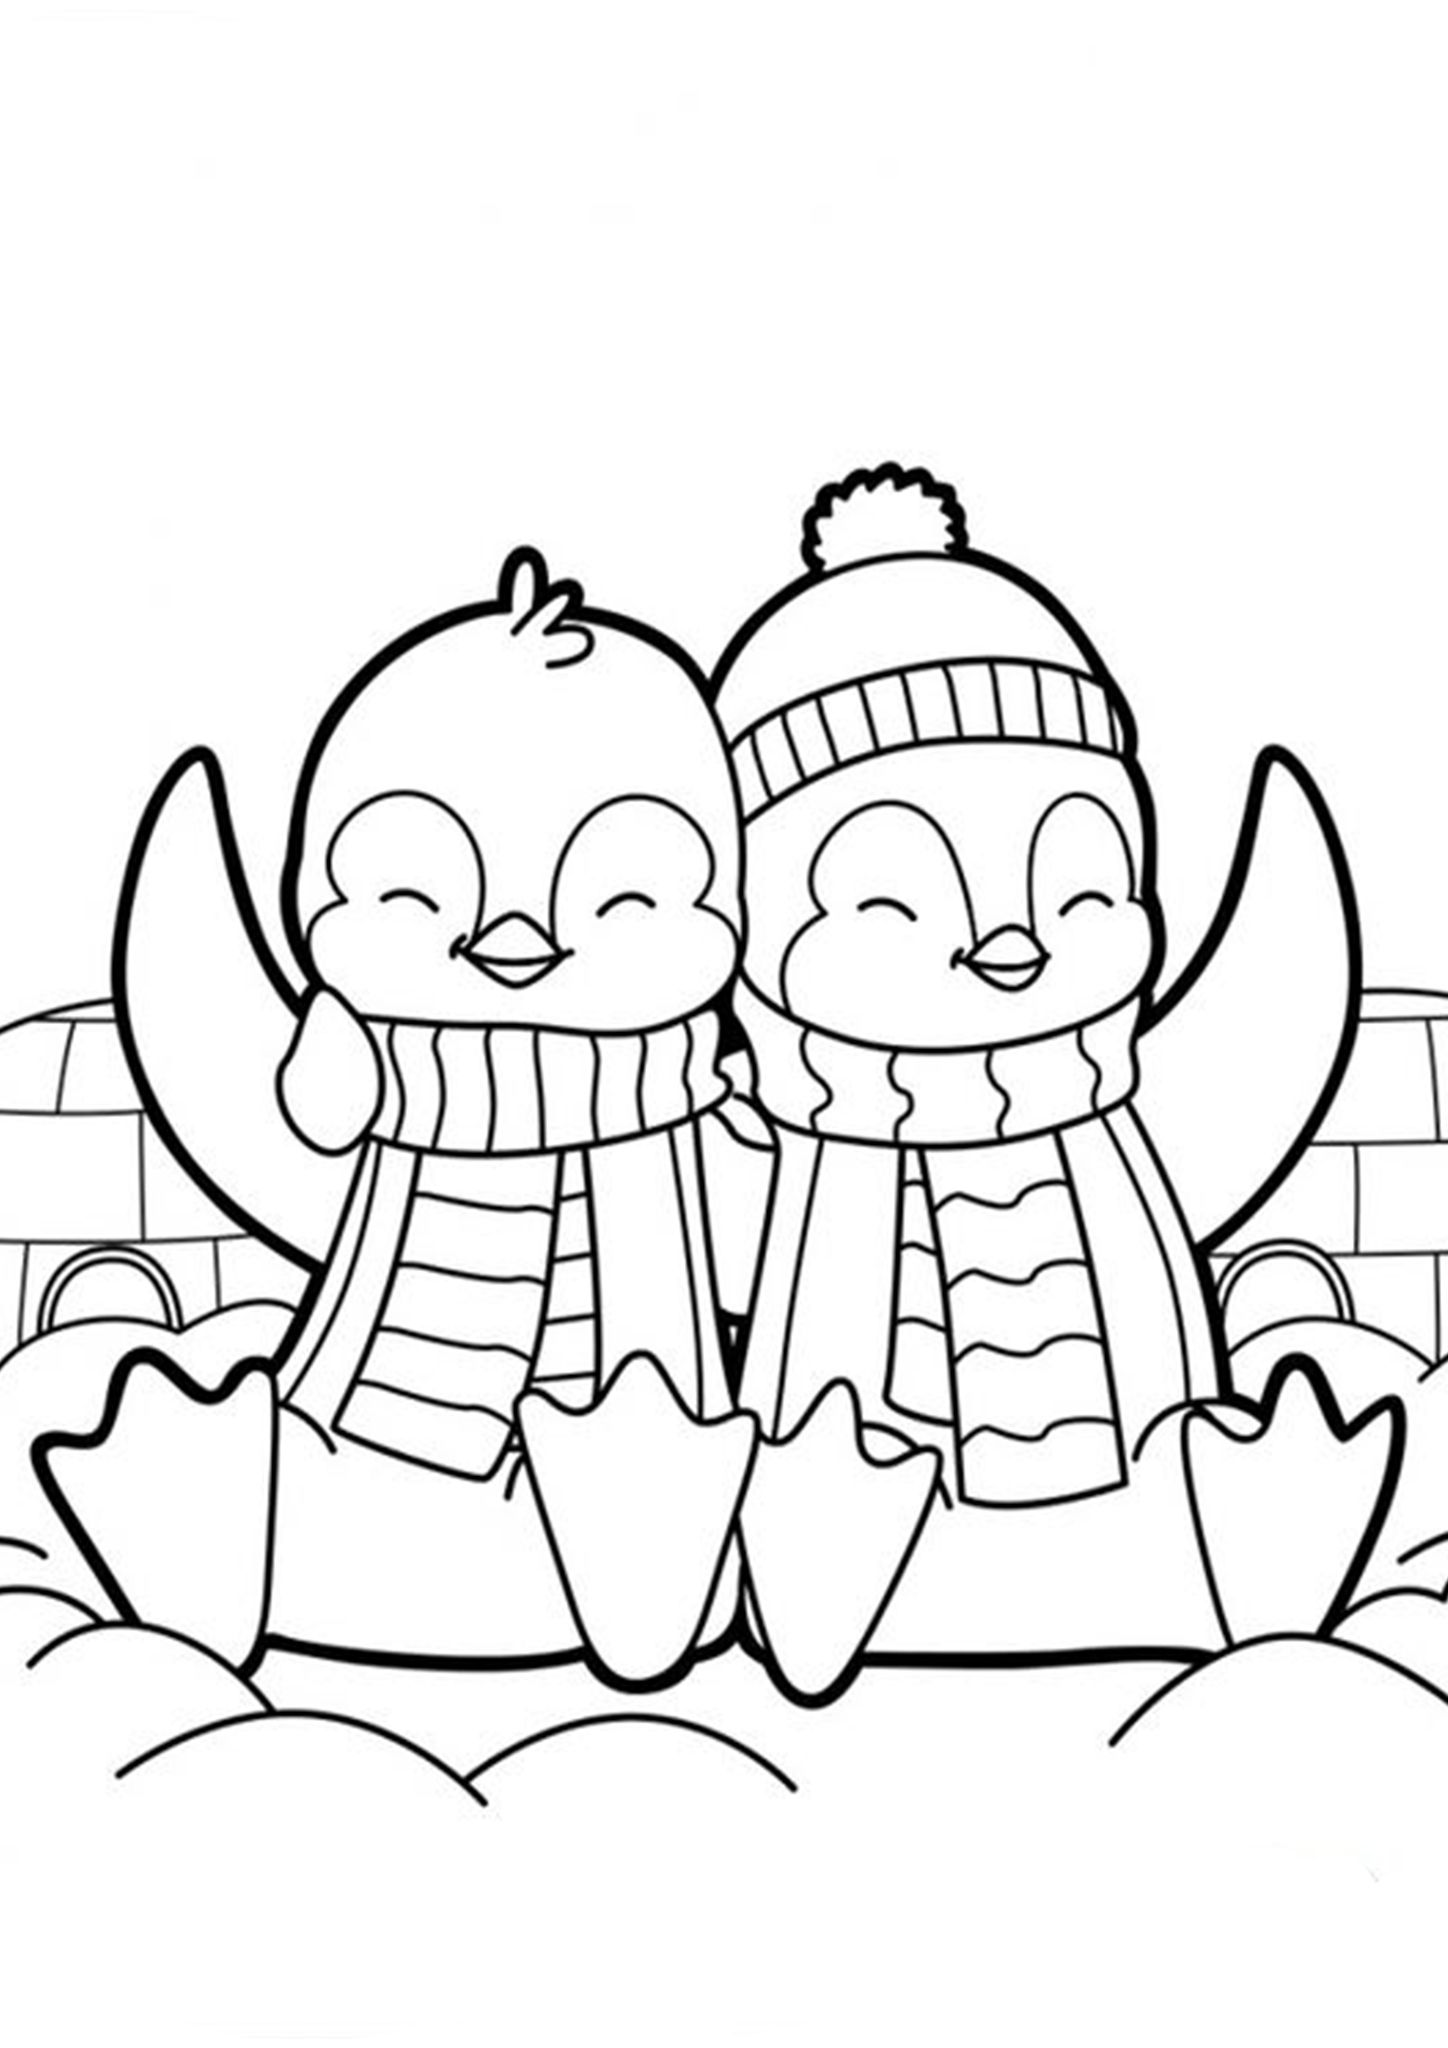 Free easy to print penguin coloring pages penguin coloring pages christmas coloring sheets cute coloring pages